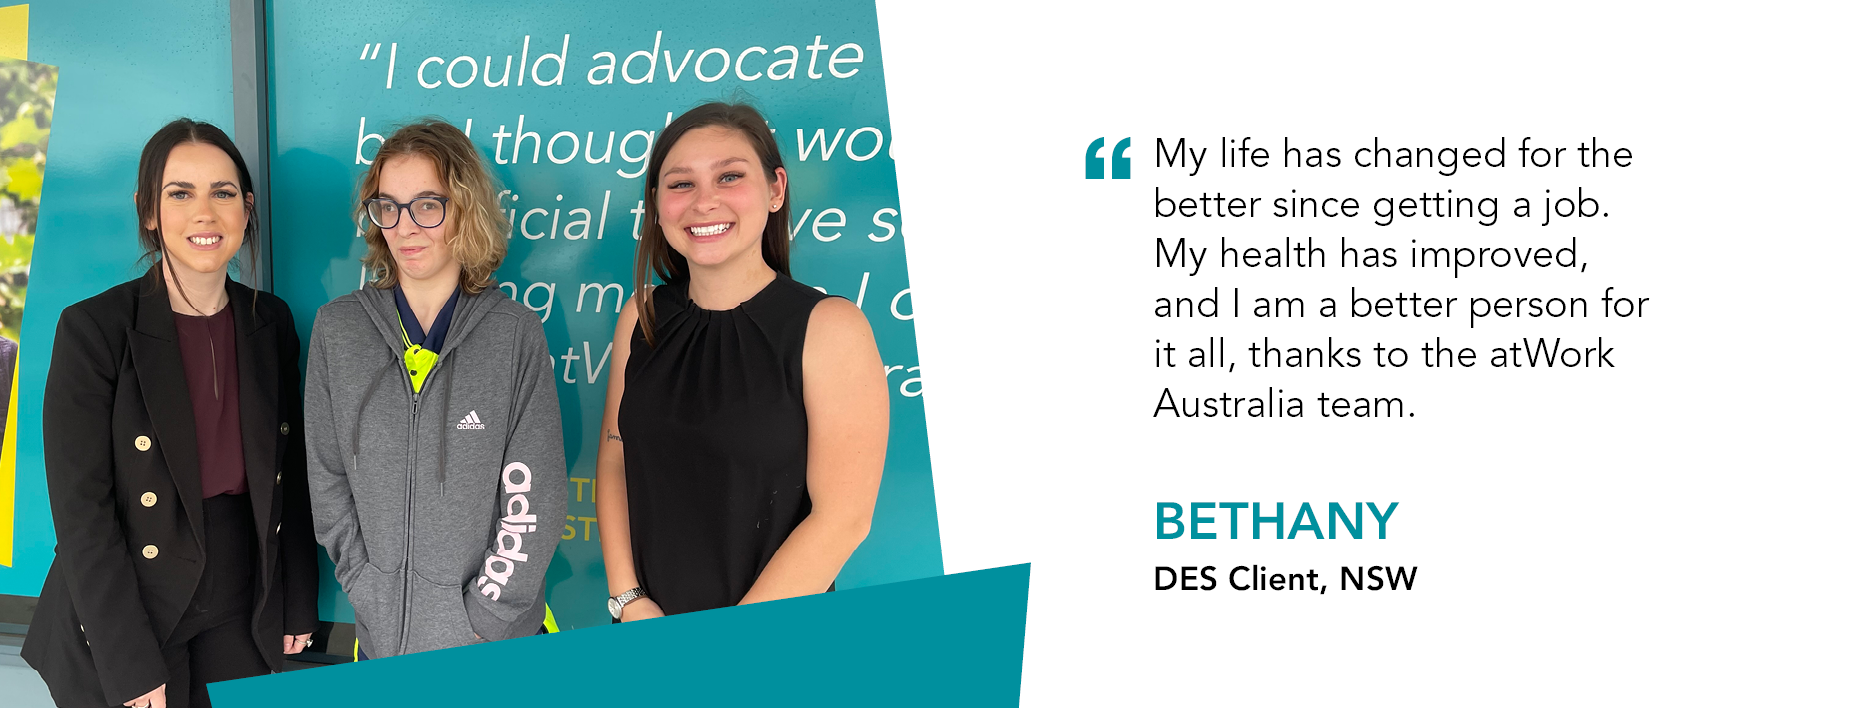 Bethany stands in the middle of two atWork Australia employees. Quote reads "My life has changed for the better since getting a job. My health has improved, and I am a better person for it all, thanks to the atWork Australia team." said Bethany, DES Client NSW. 